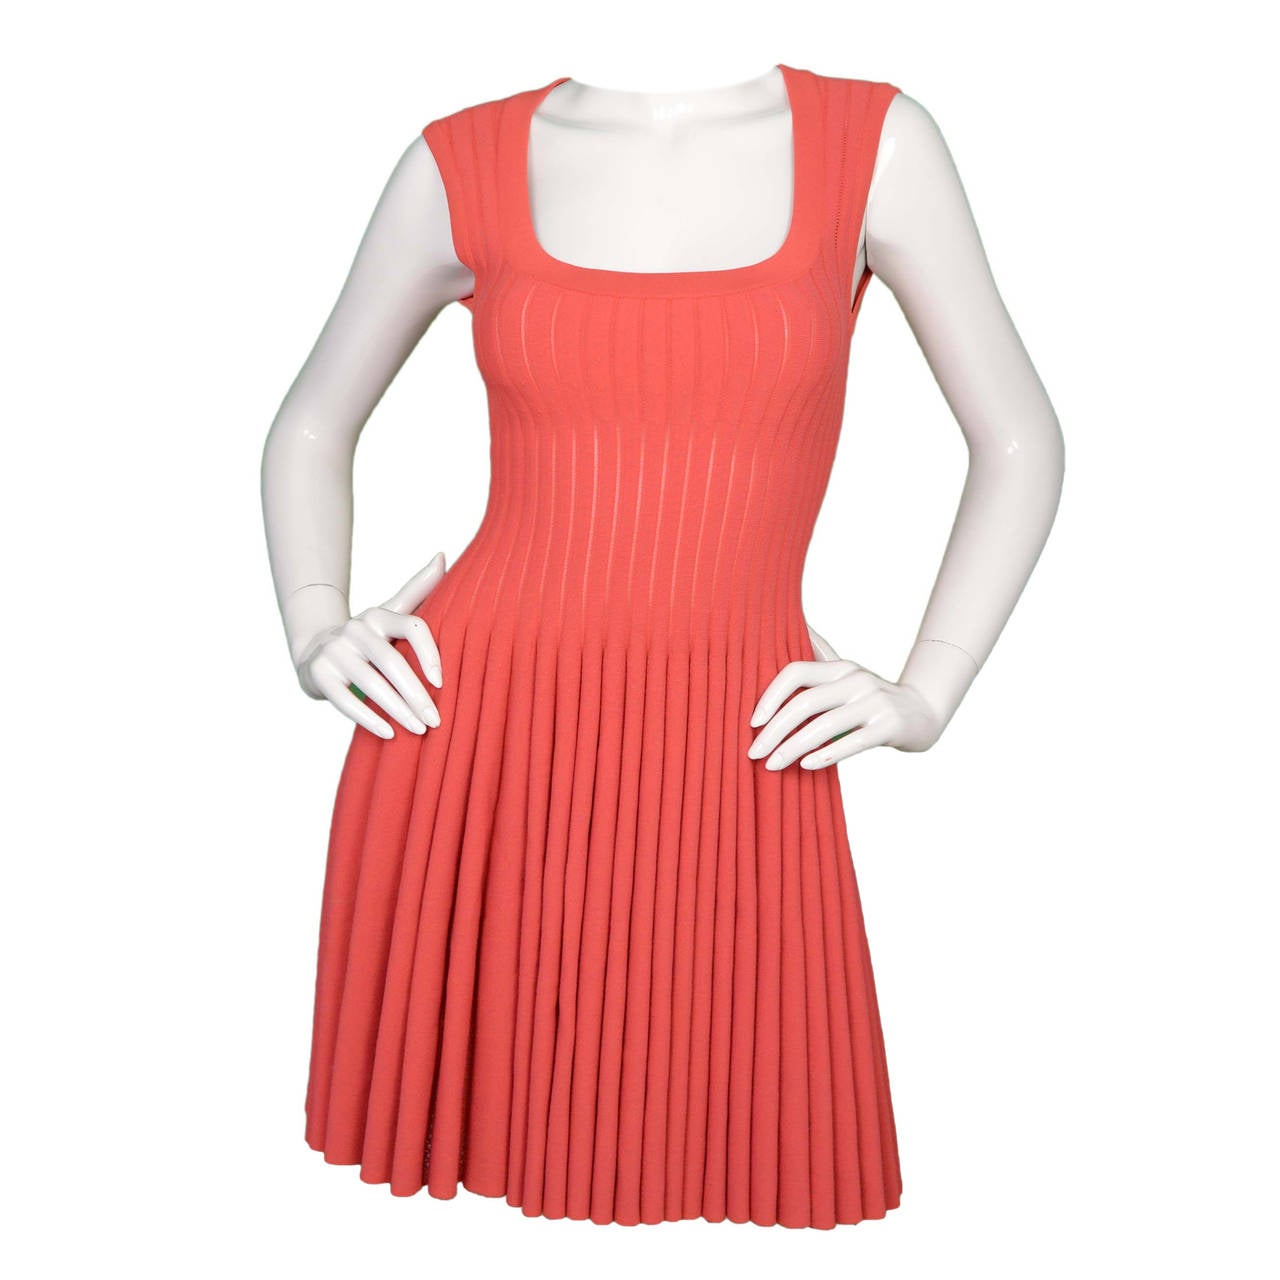 ALAIA Coral Sleeveless Ribbed Fit Flare Dress sz 38